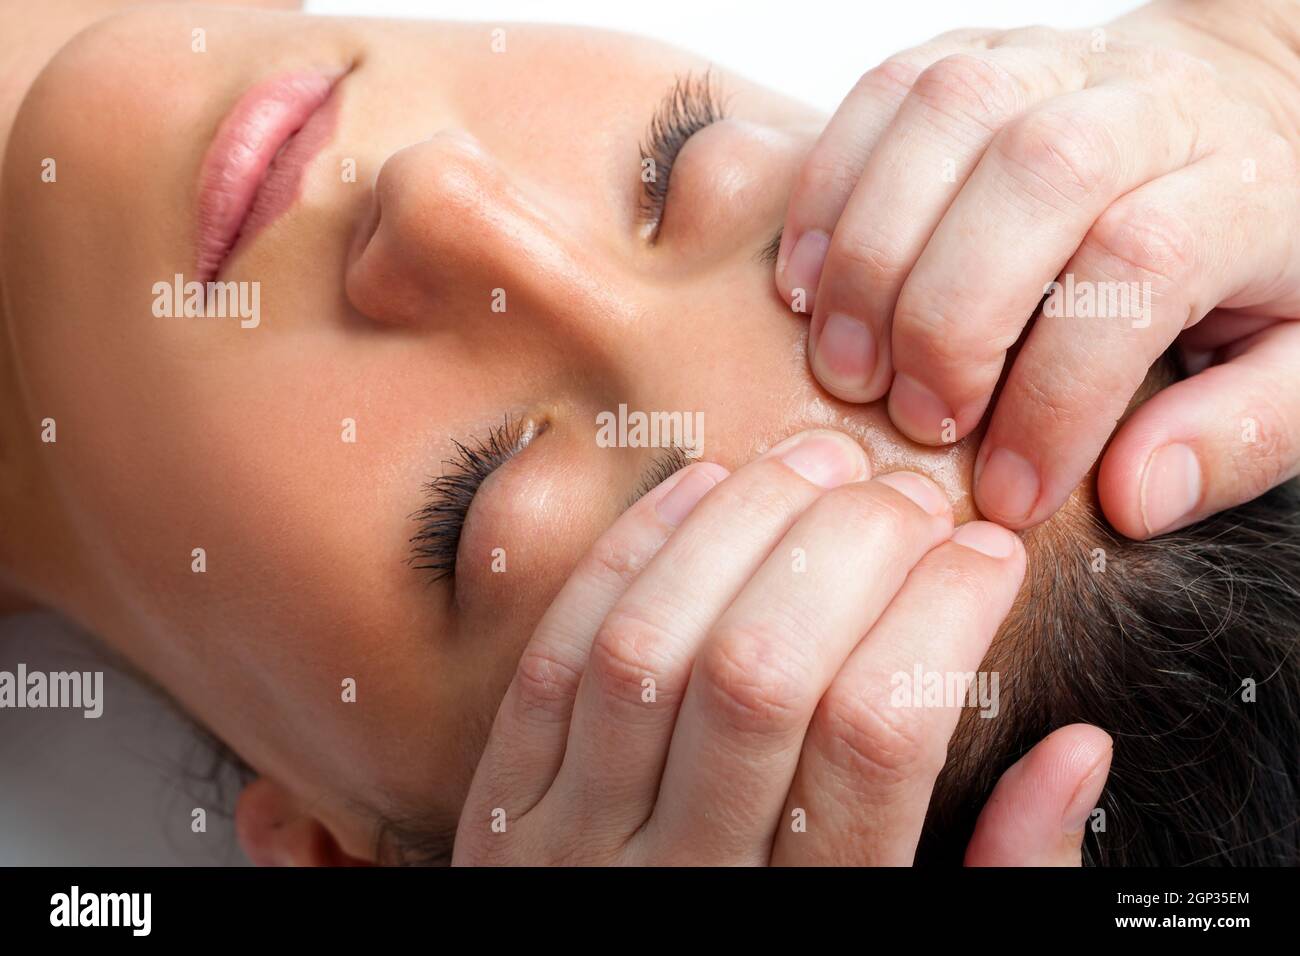 Macro close up face shot of young woman receiving massage. Therapist hand doing manipulative treatment on forehead. Stock Photo